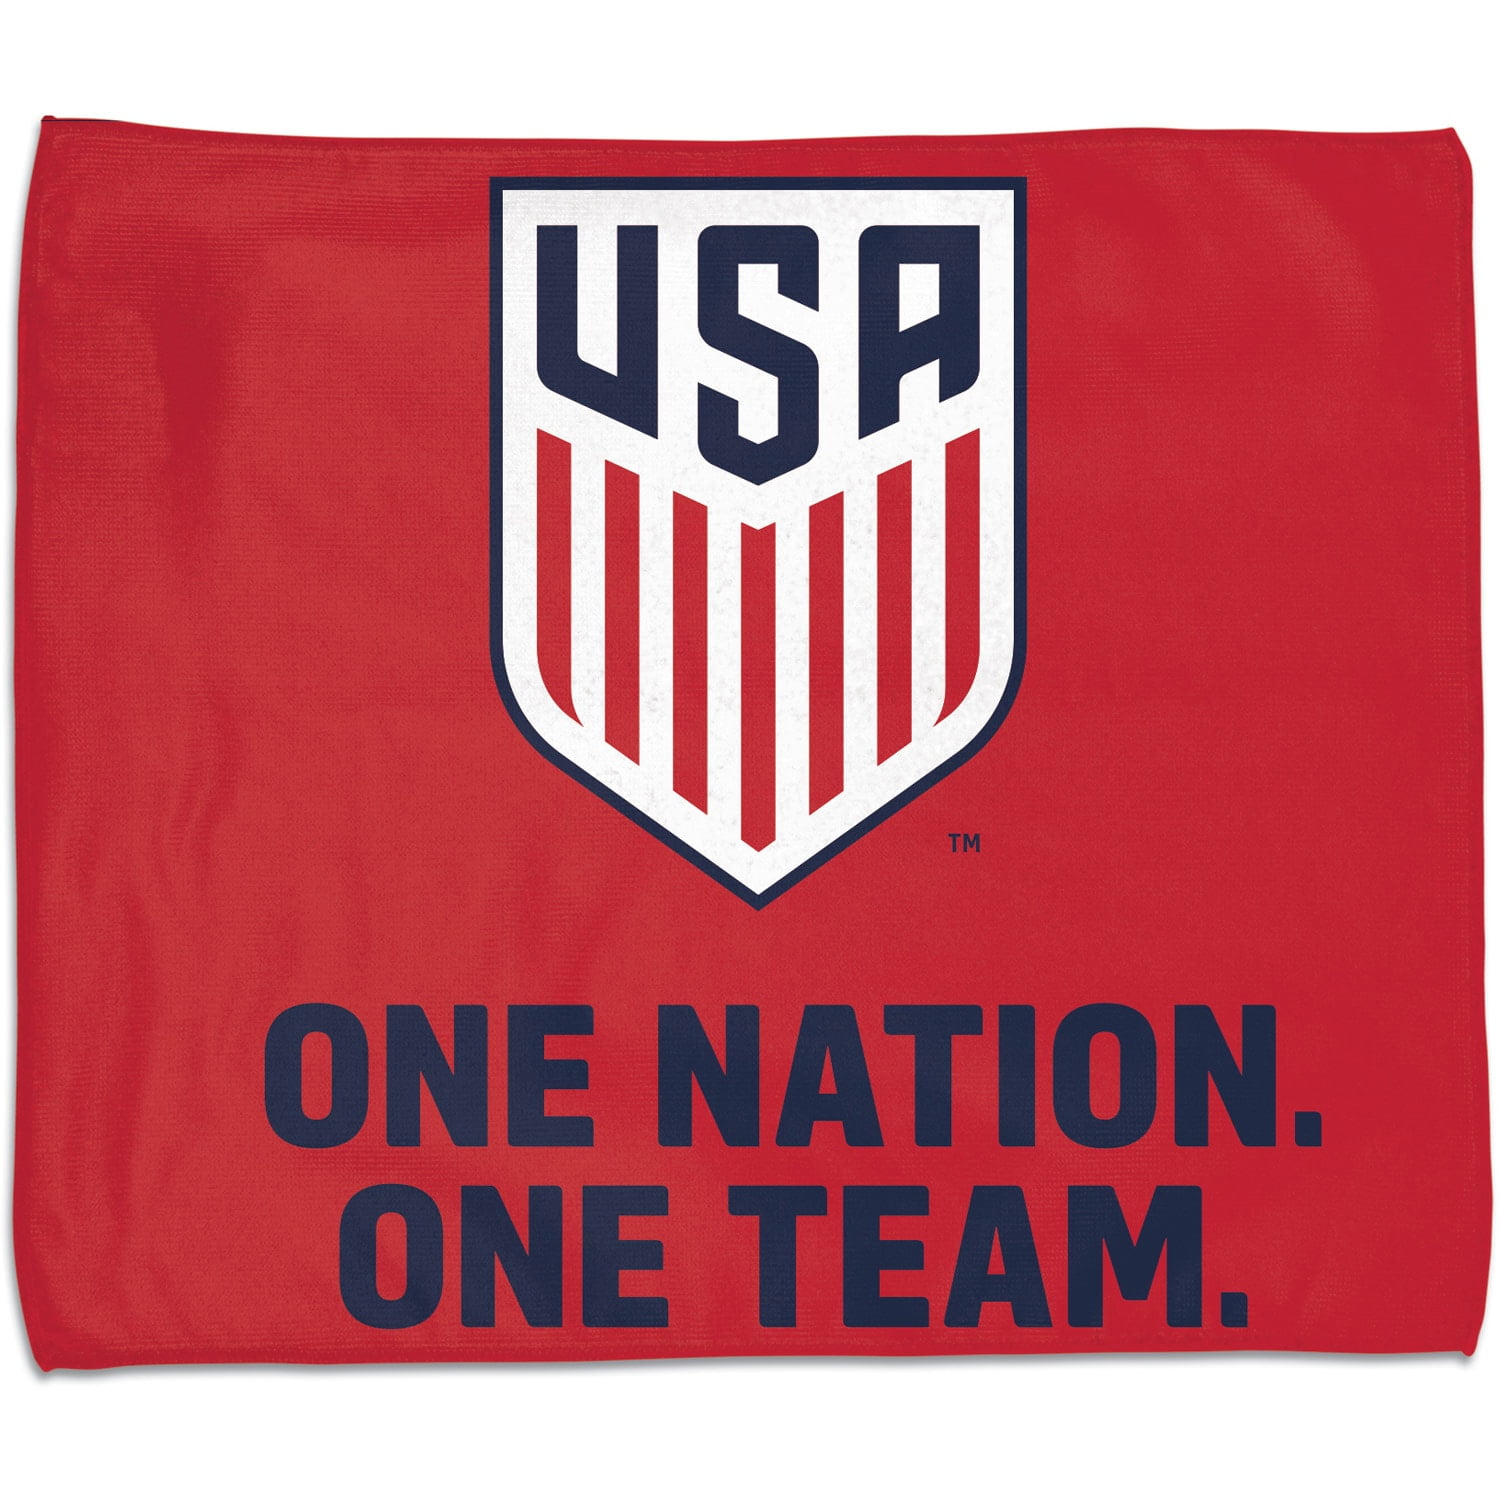 WinCraft USA One Nation One Team Soccer Banner Flag and Banner Flag 